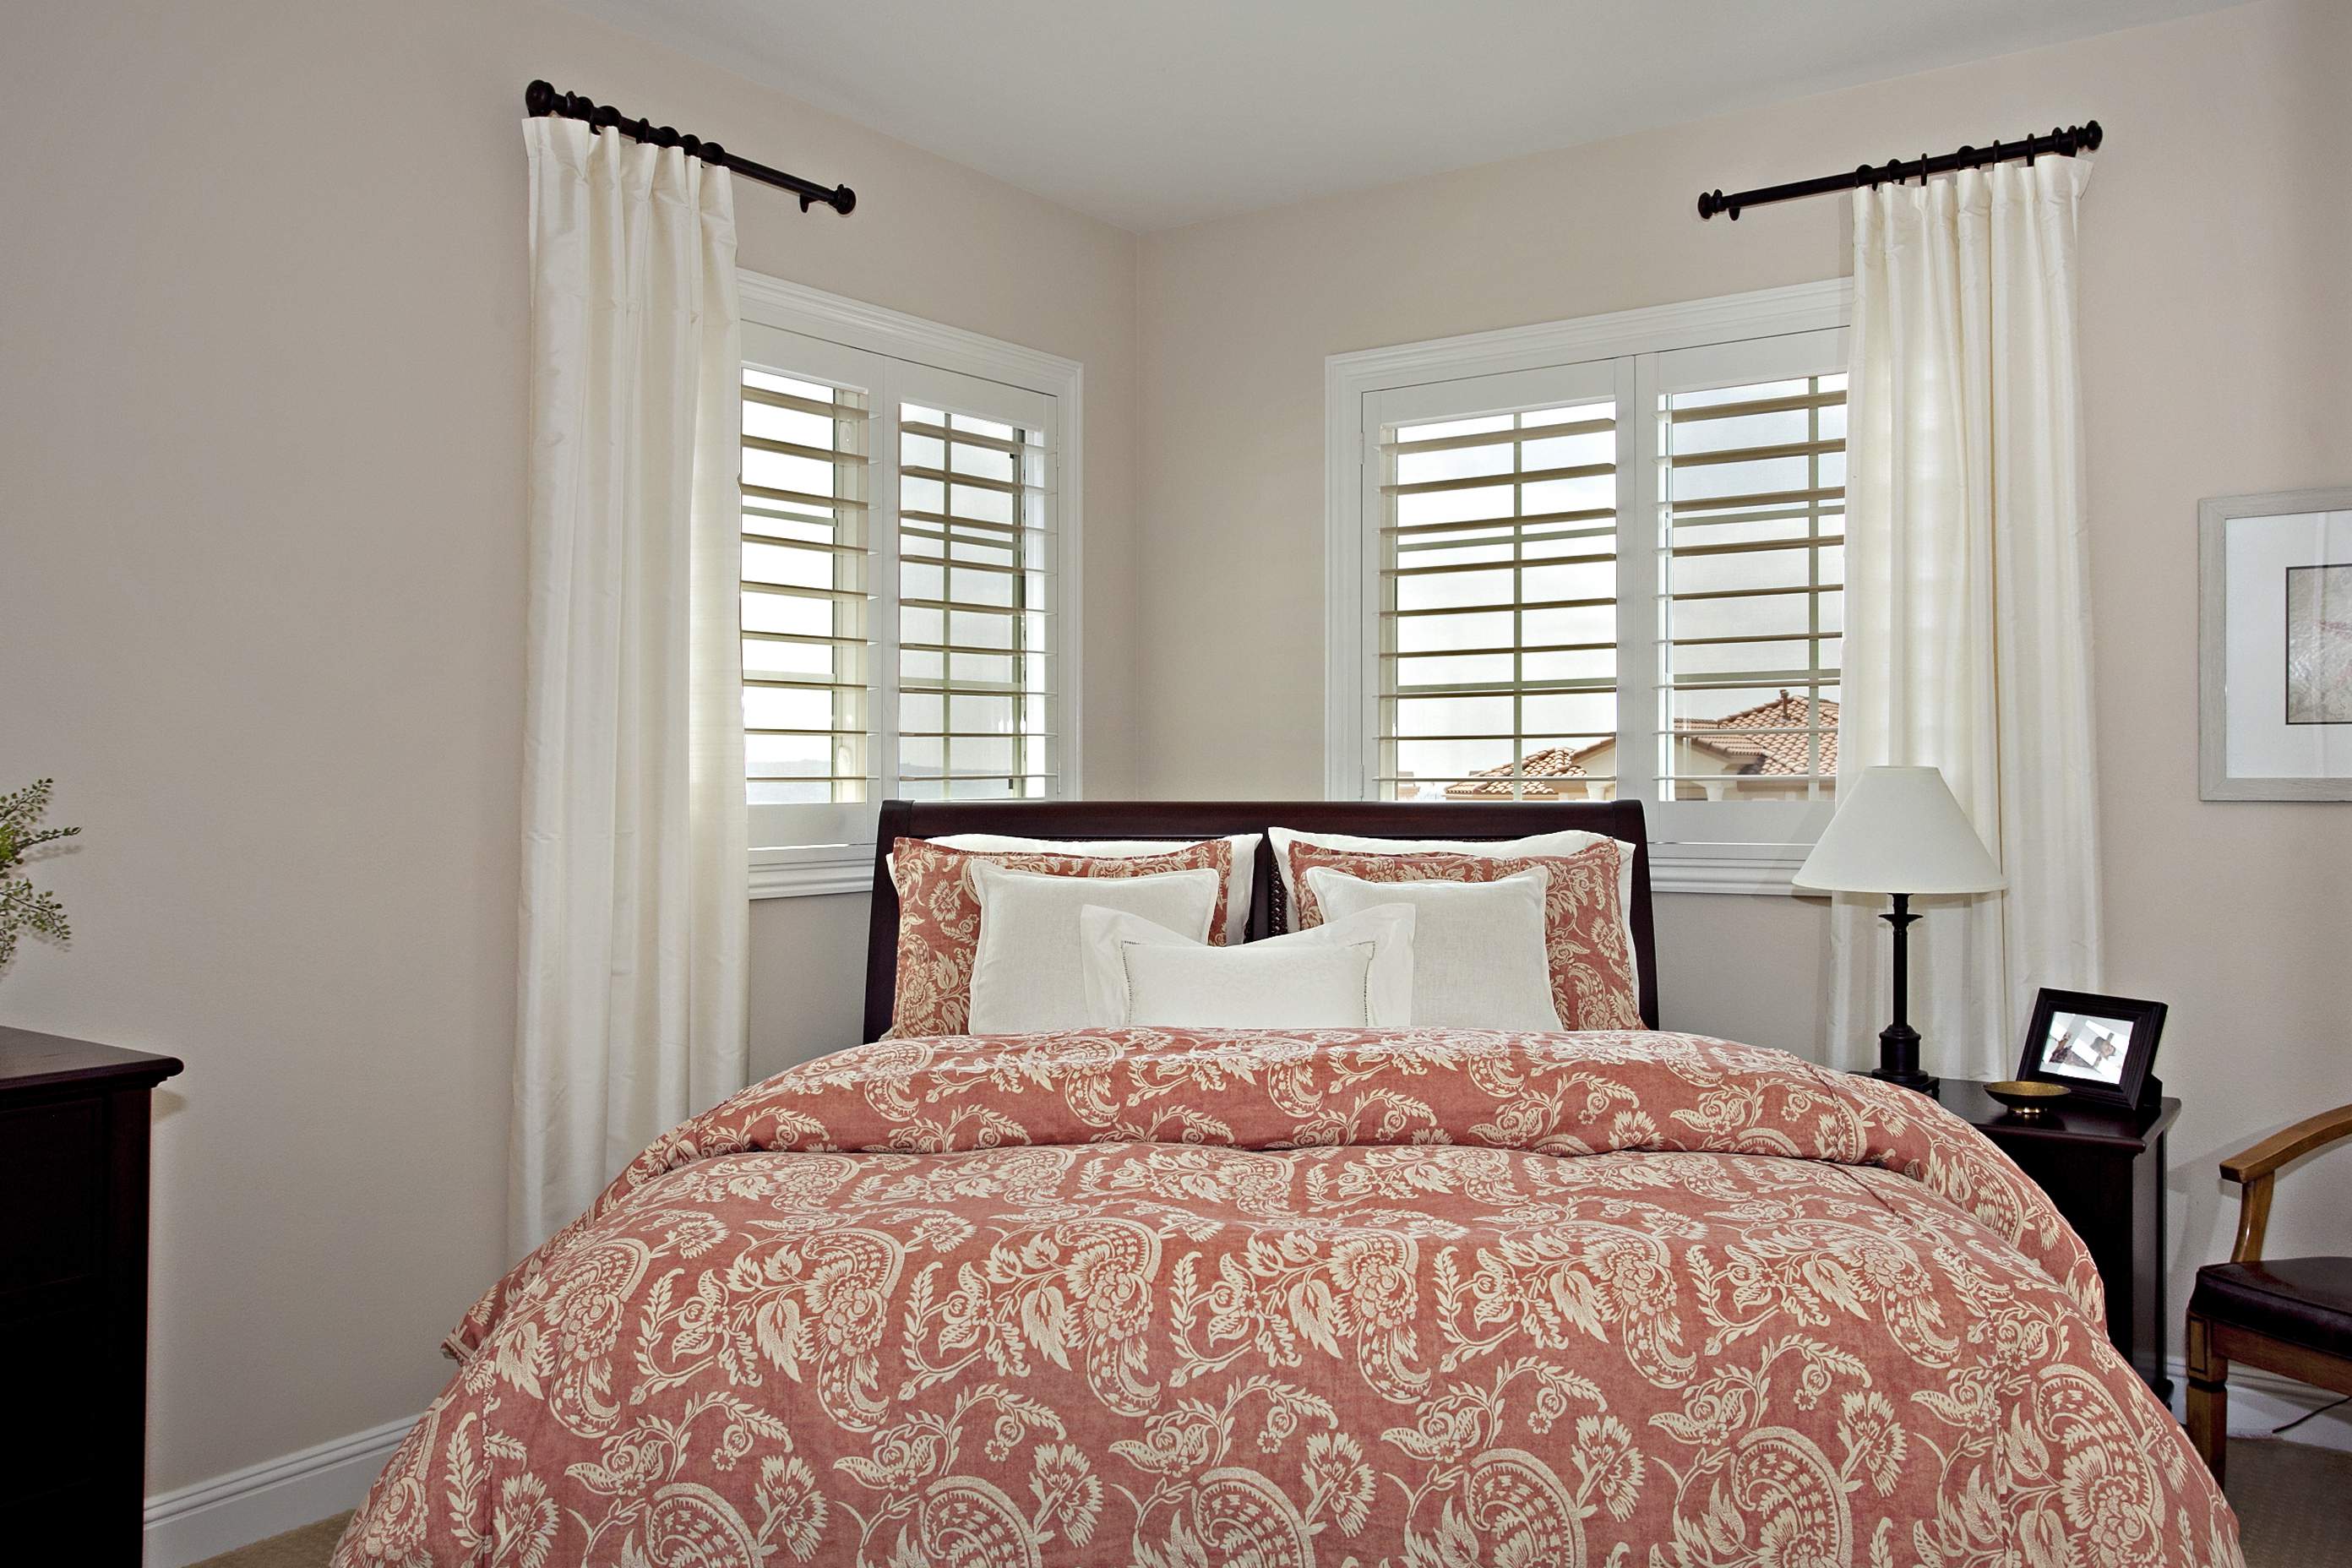 Shutters with decorative panels and handle cutout